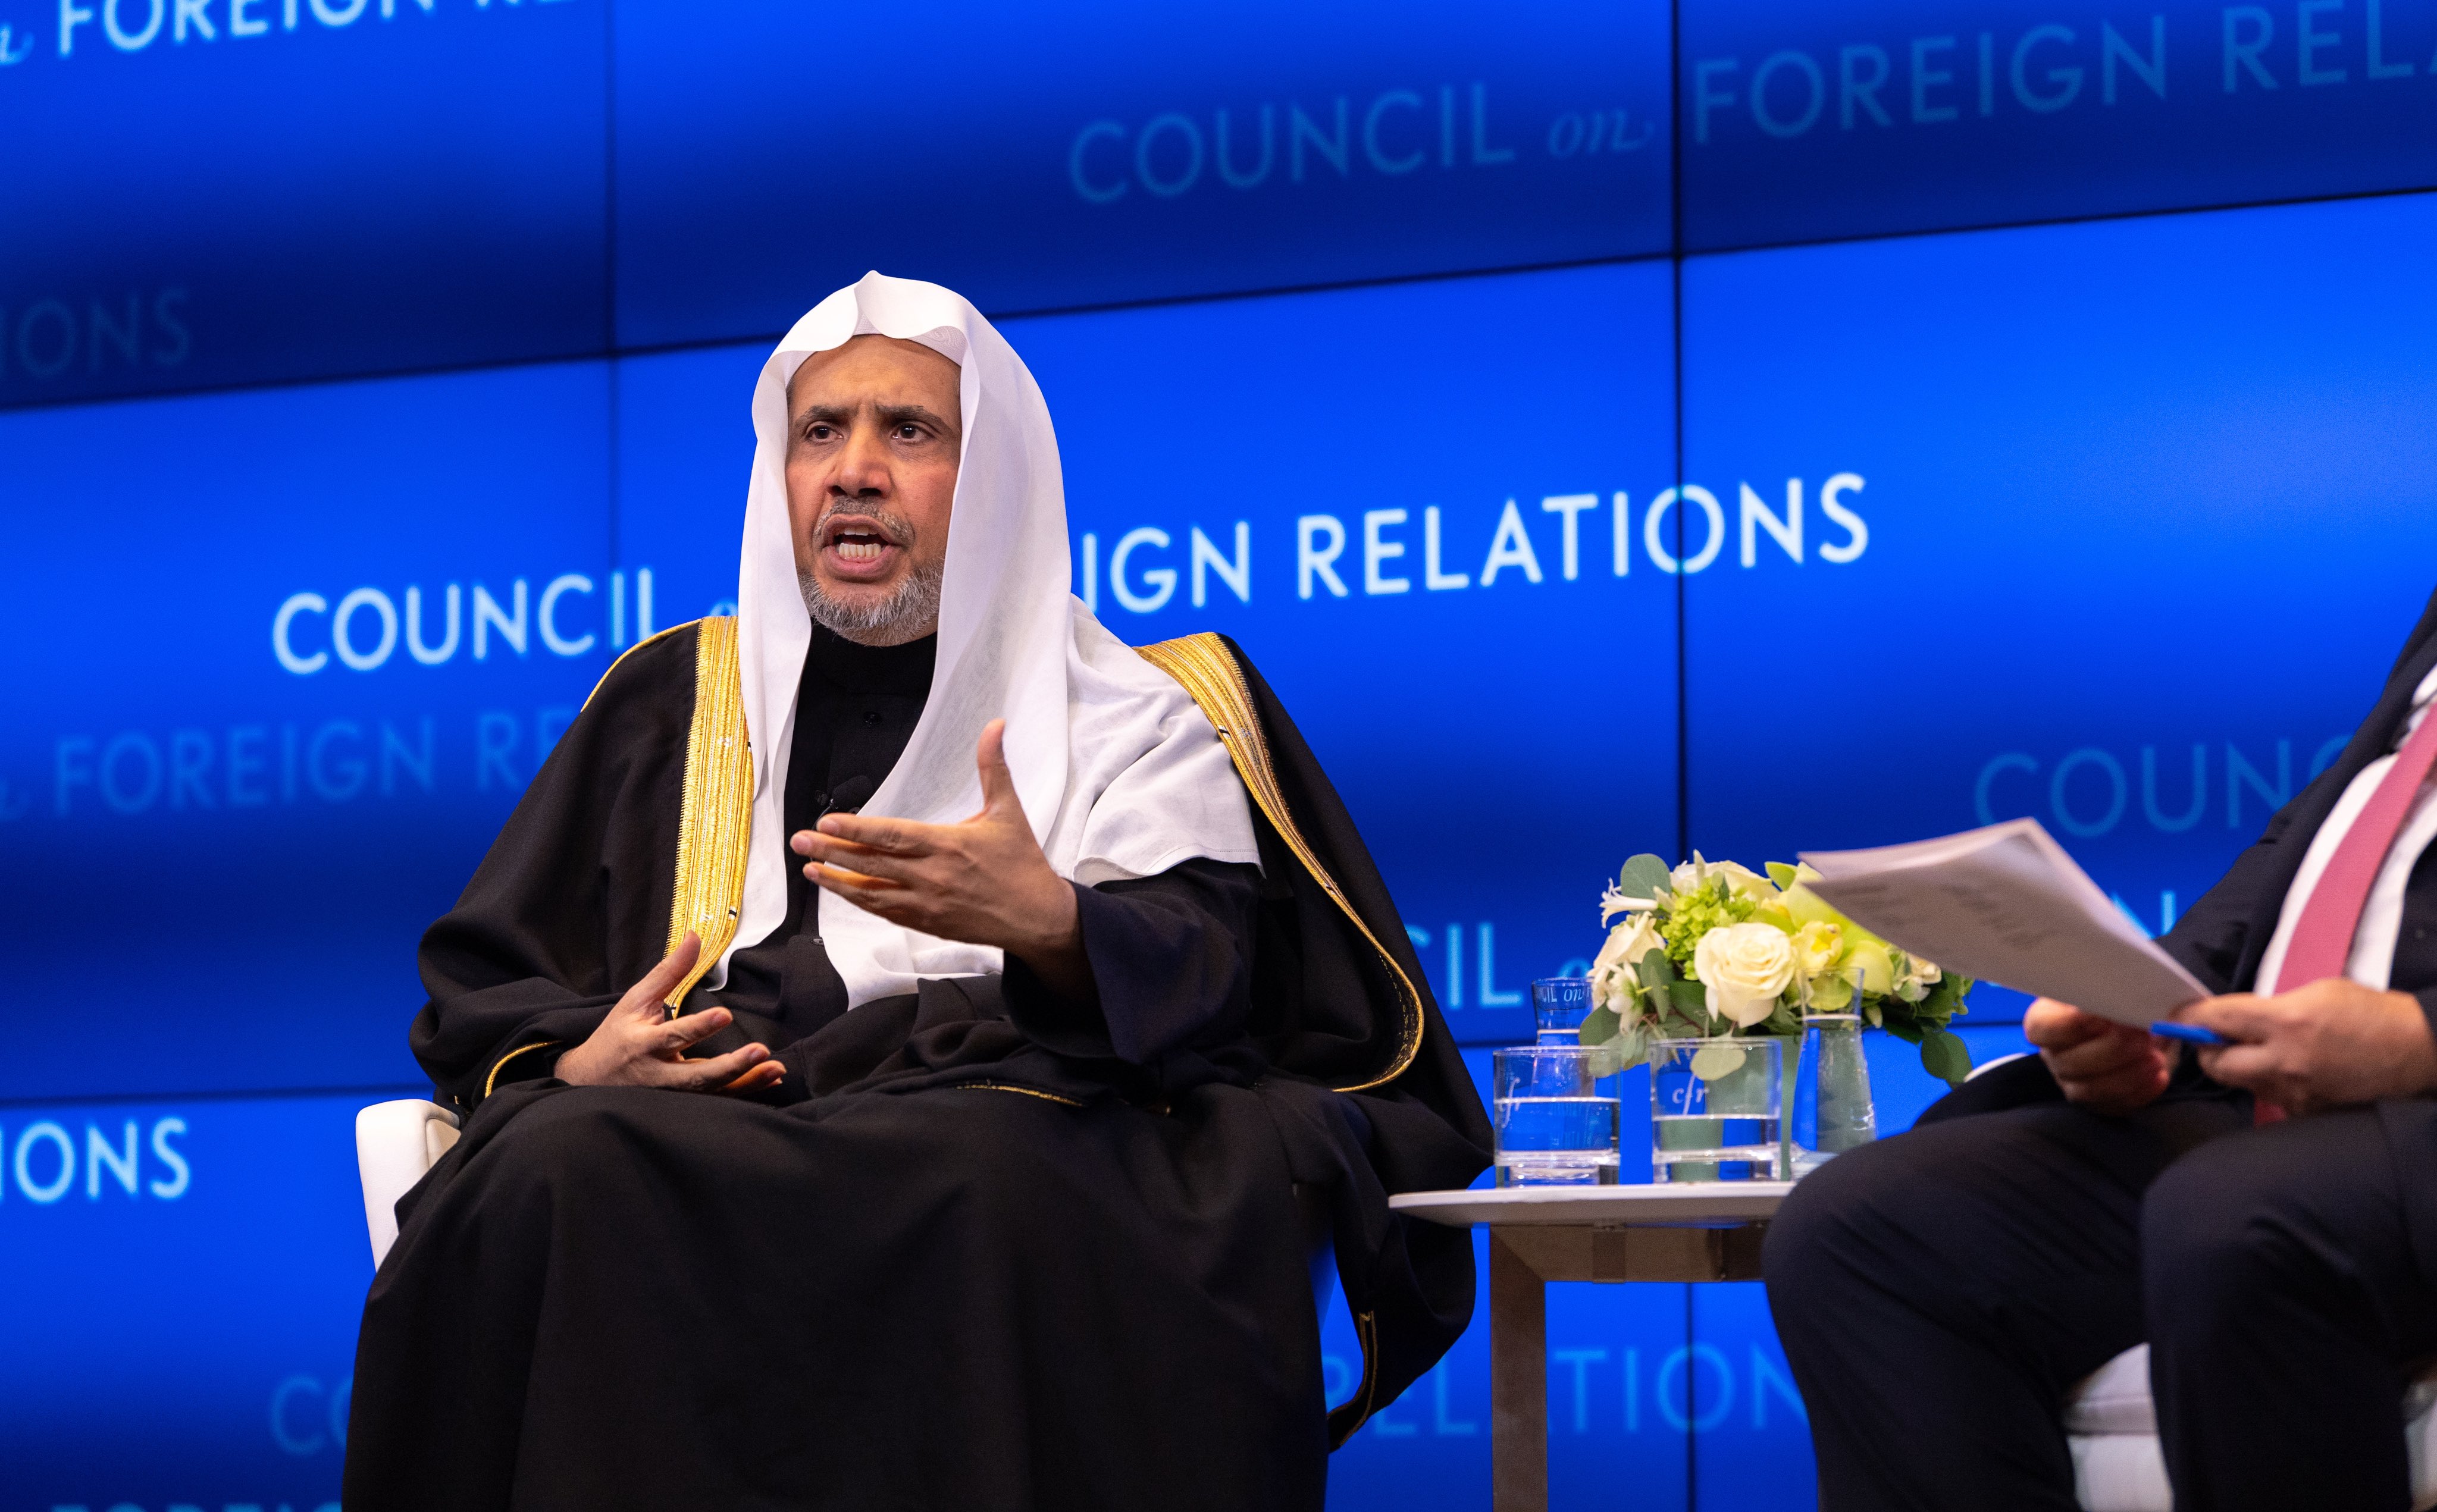 Ranked among the top global think tanks, the American Council on Foreign Relations (CFR), recently hosted His Excellency Sheikh Dr. Mohammed Al-Issa, Secretary-General of the Muslim World League at its headquarters in New York